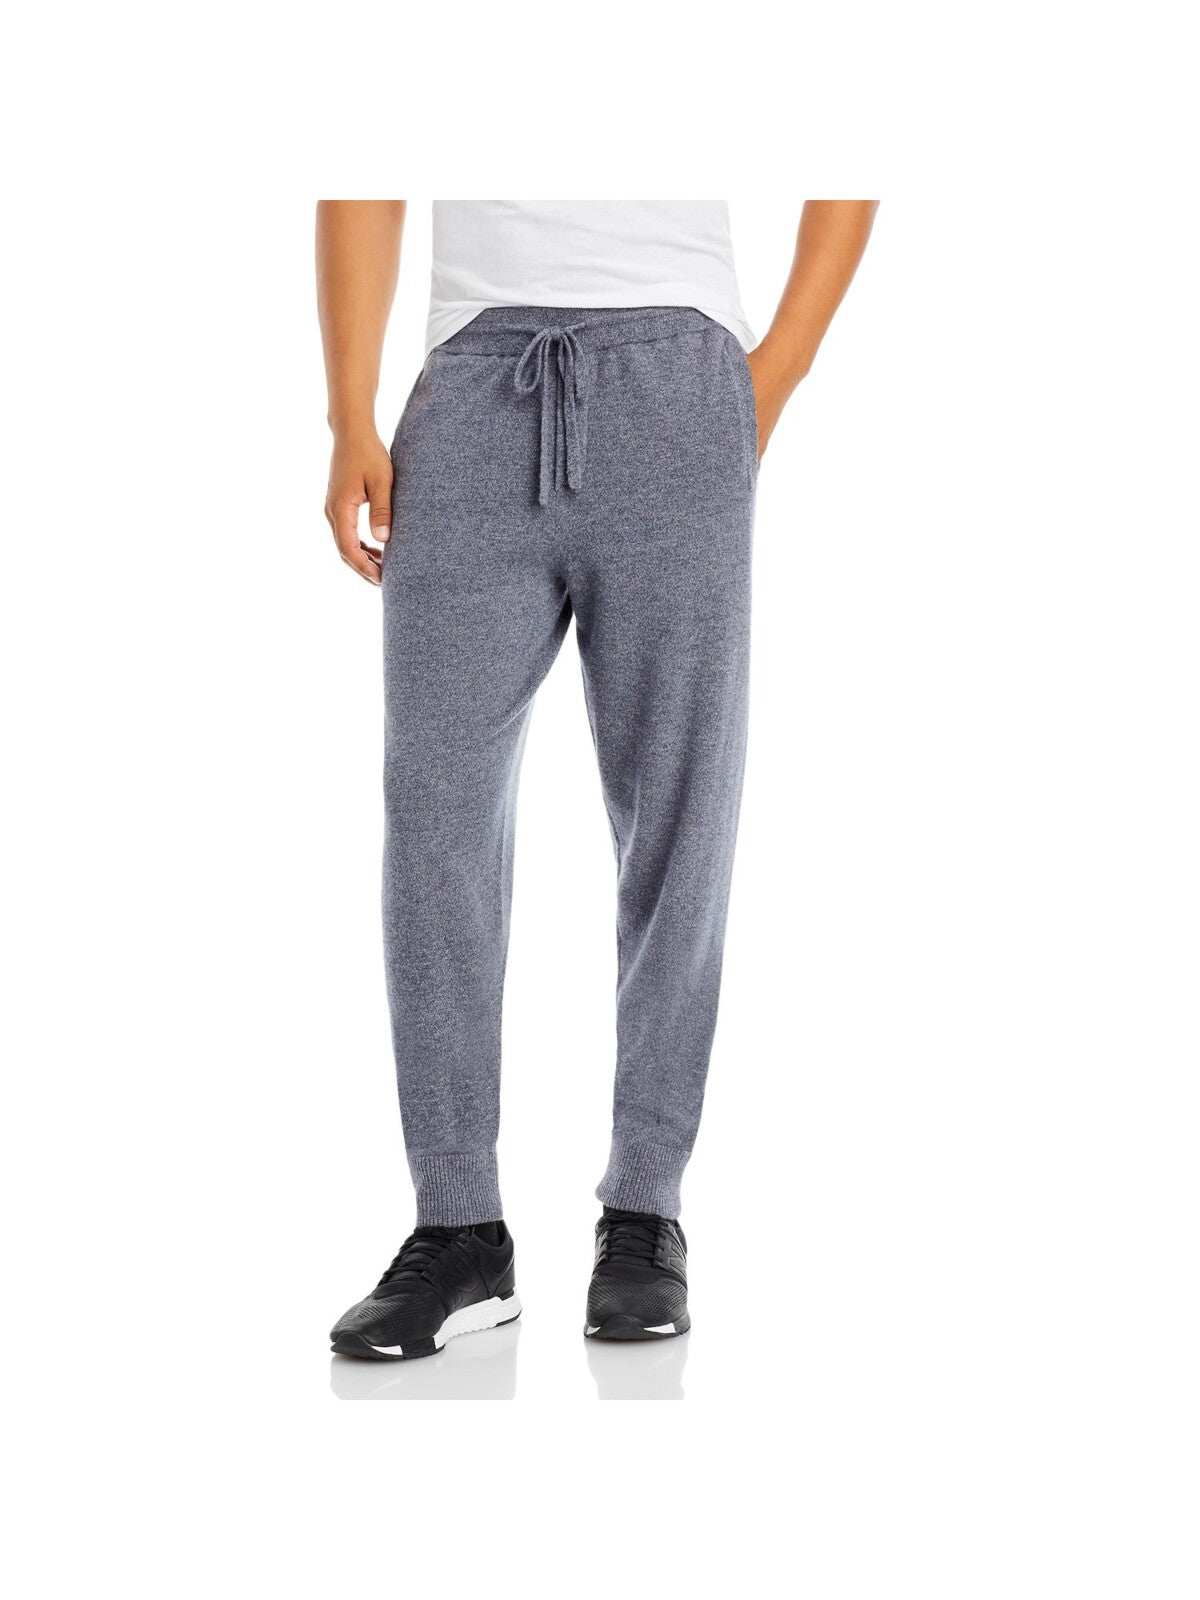 THE MENS STORE Mens Gray Heather Cashmere Joggers XXL